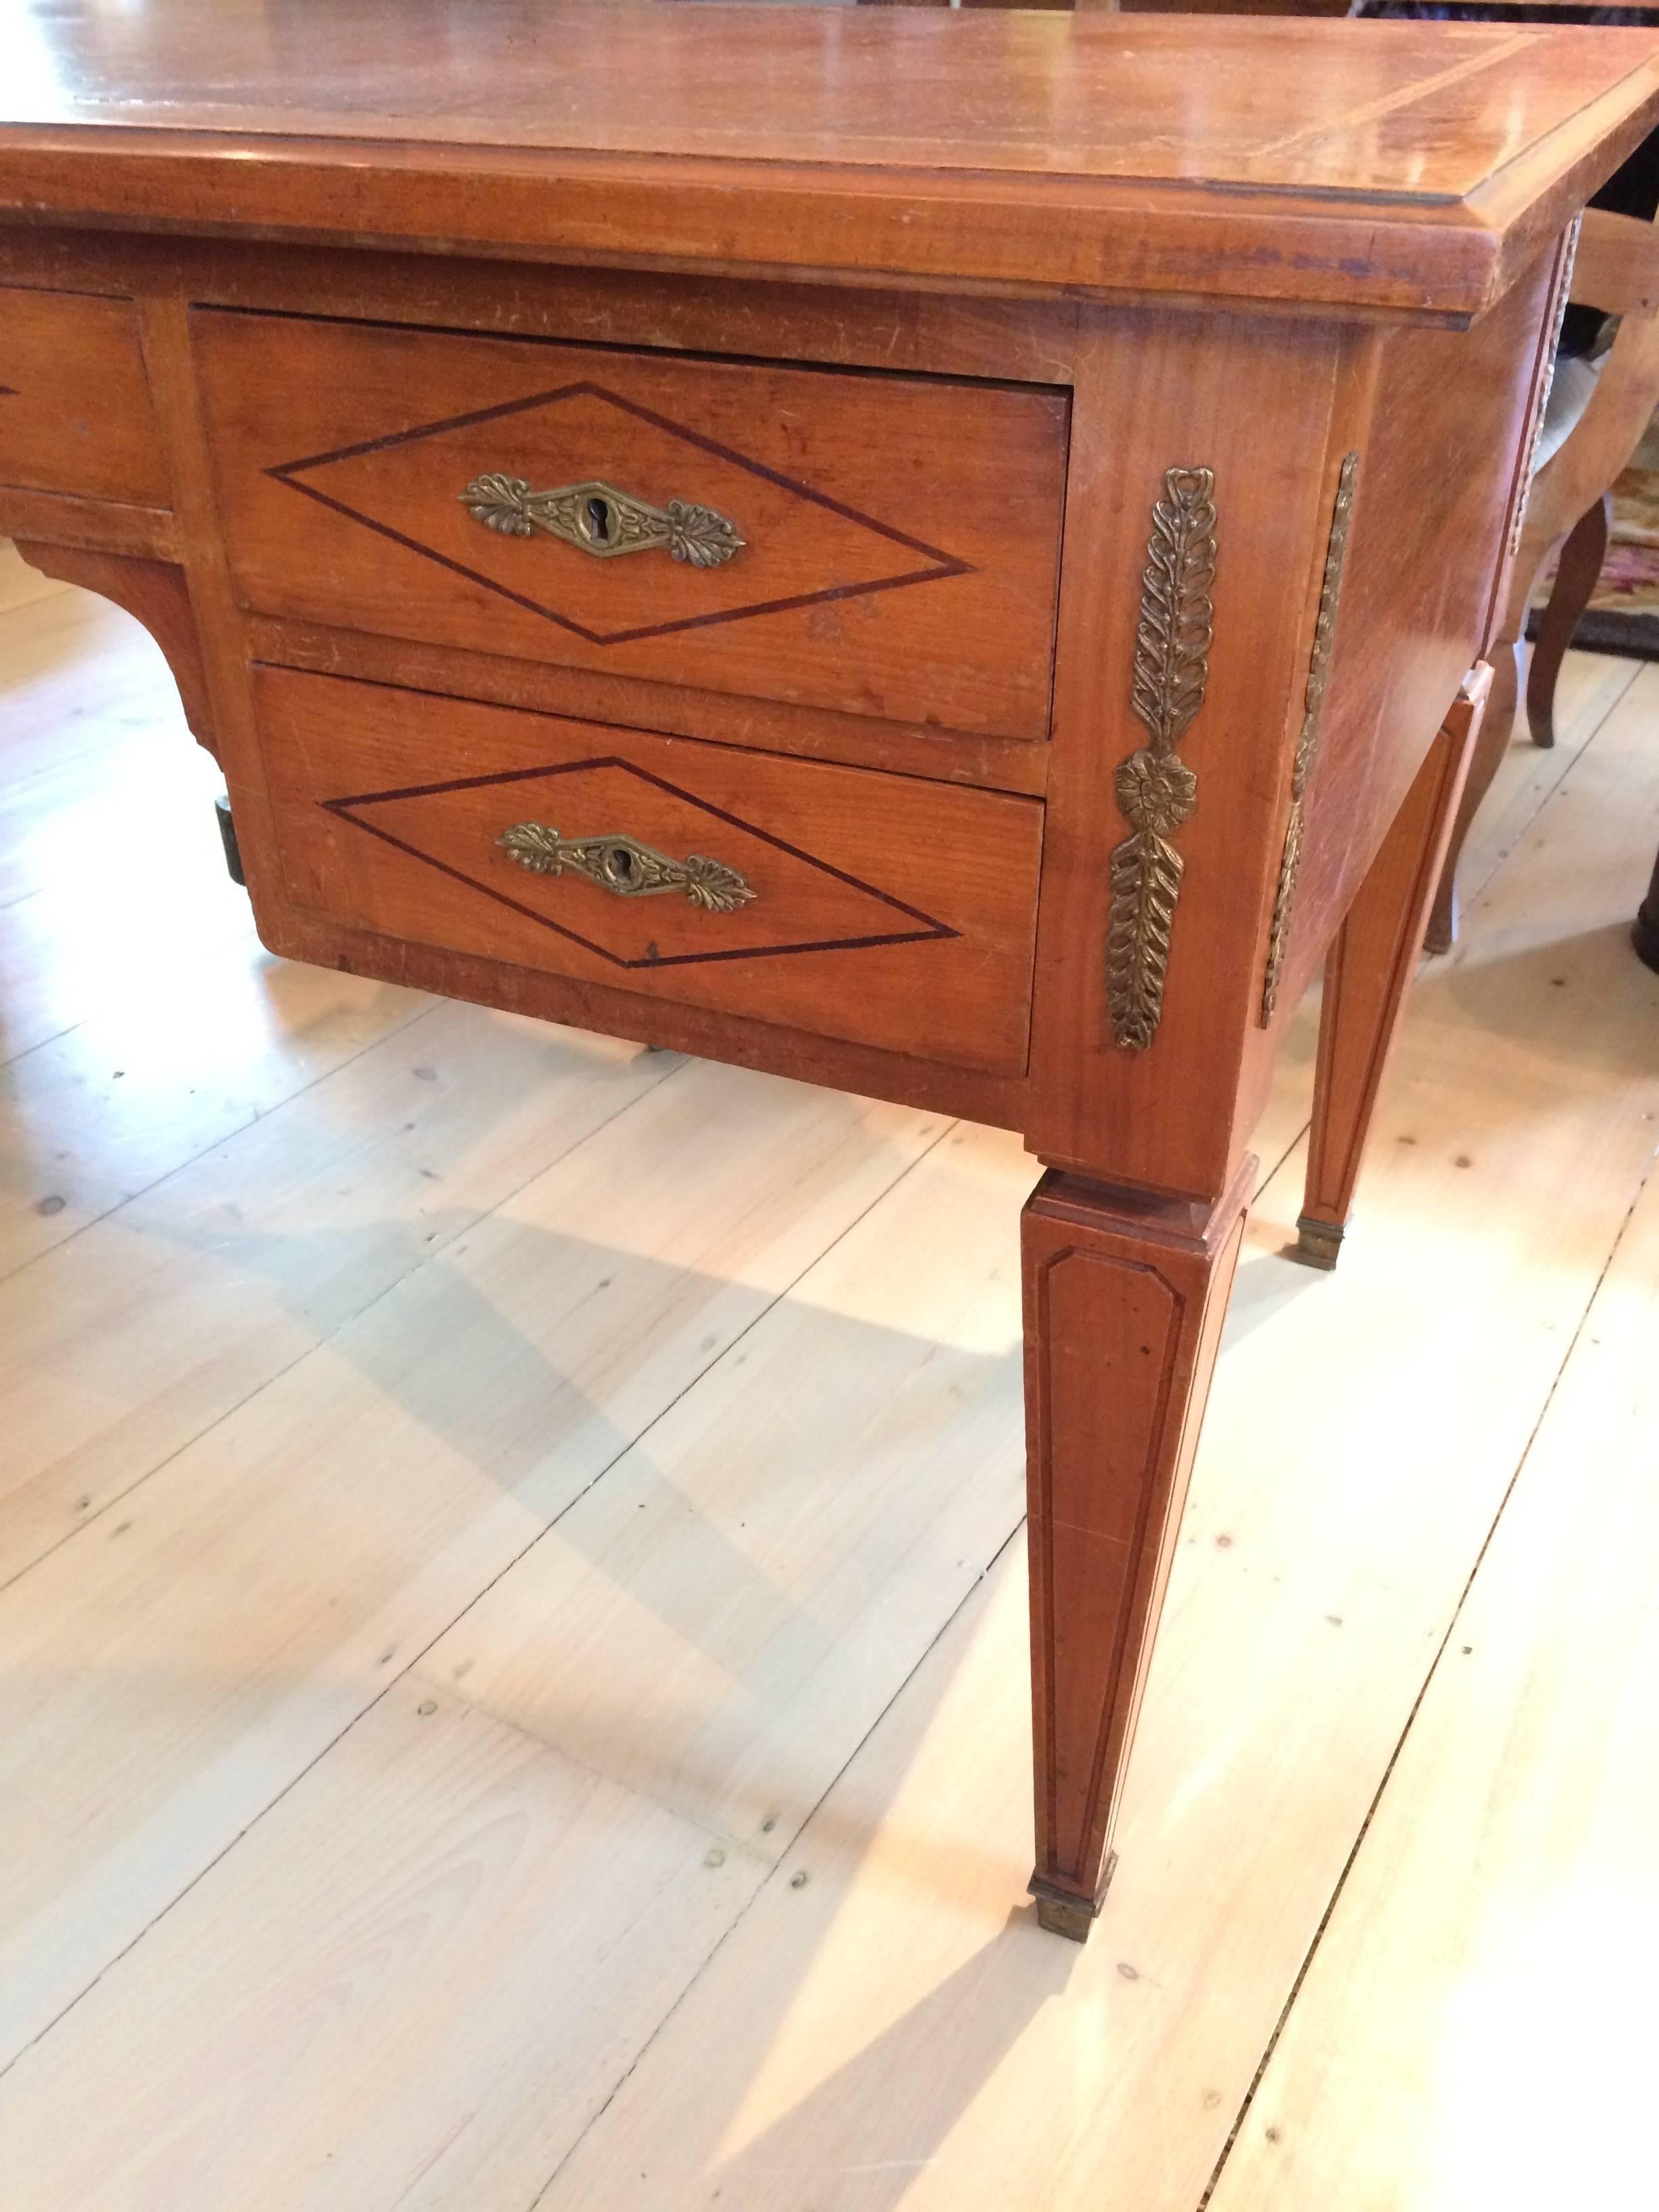 Antique walnut French Louis XVI style desk having its original embossed leather work area with a leafy gilt border. The desk extends by a hidden leaf on the right side of the desk and is opened by a decorative gold pull. The front of the desk has